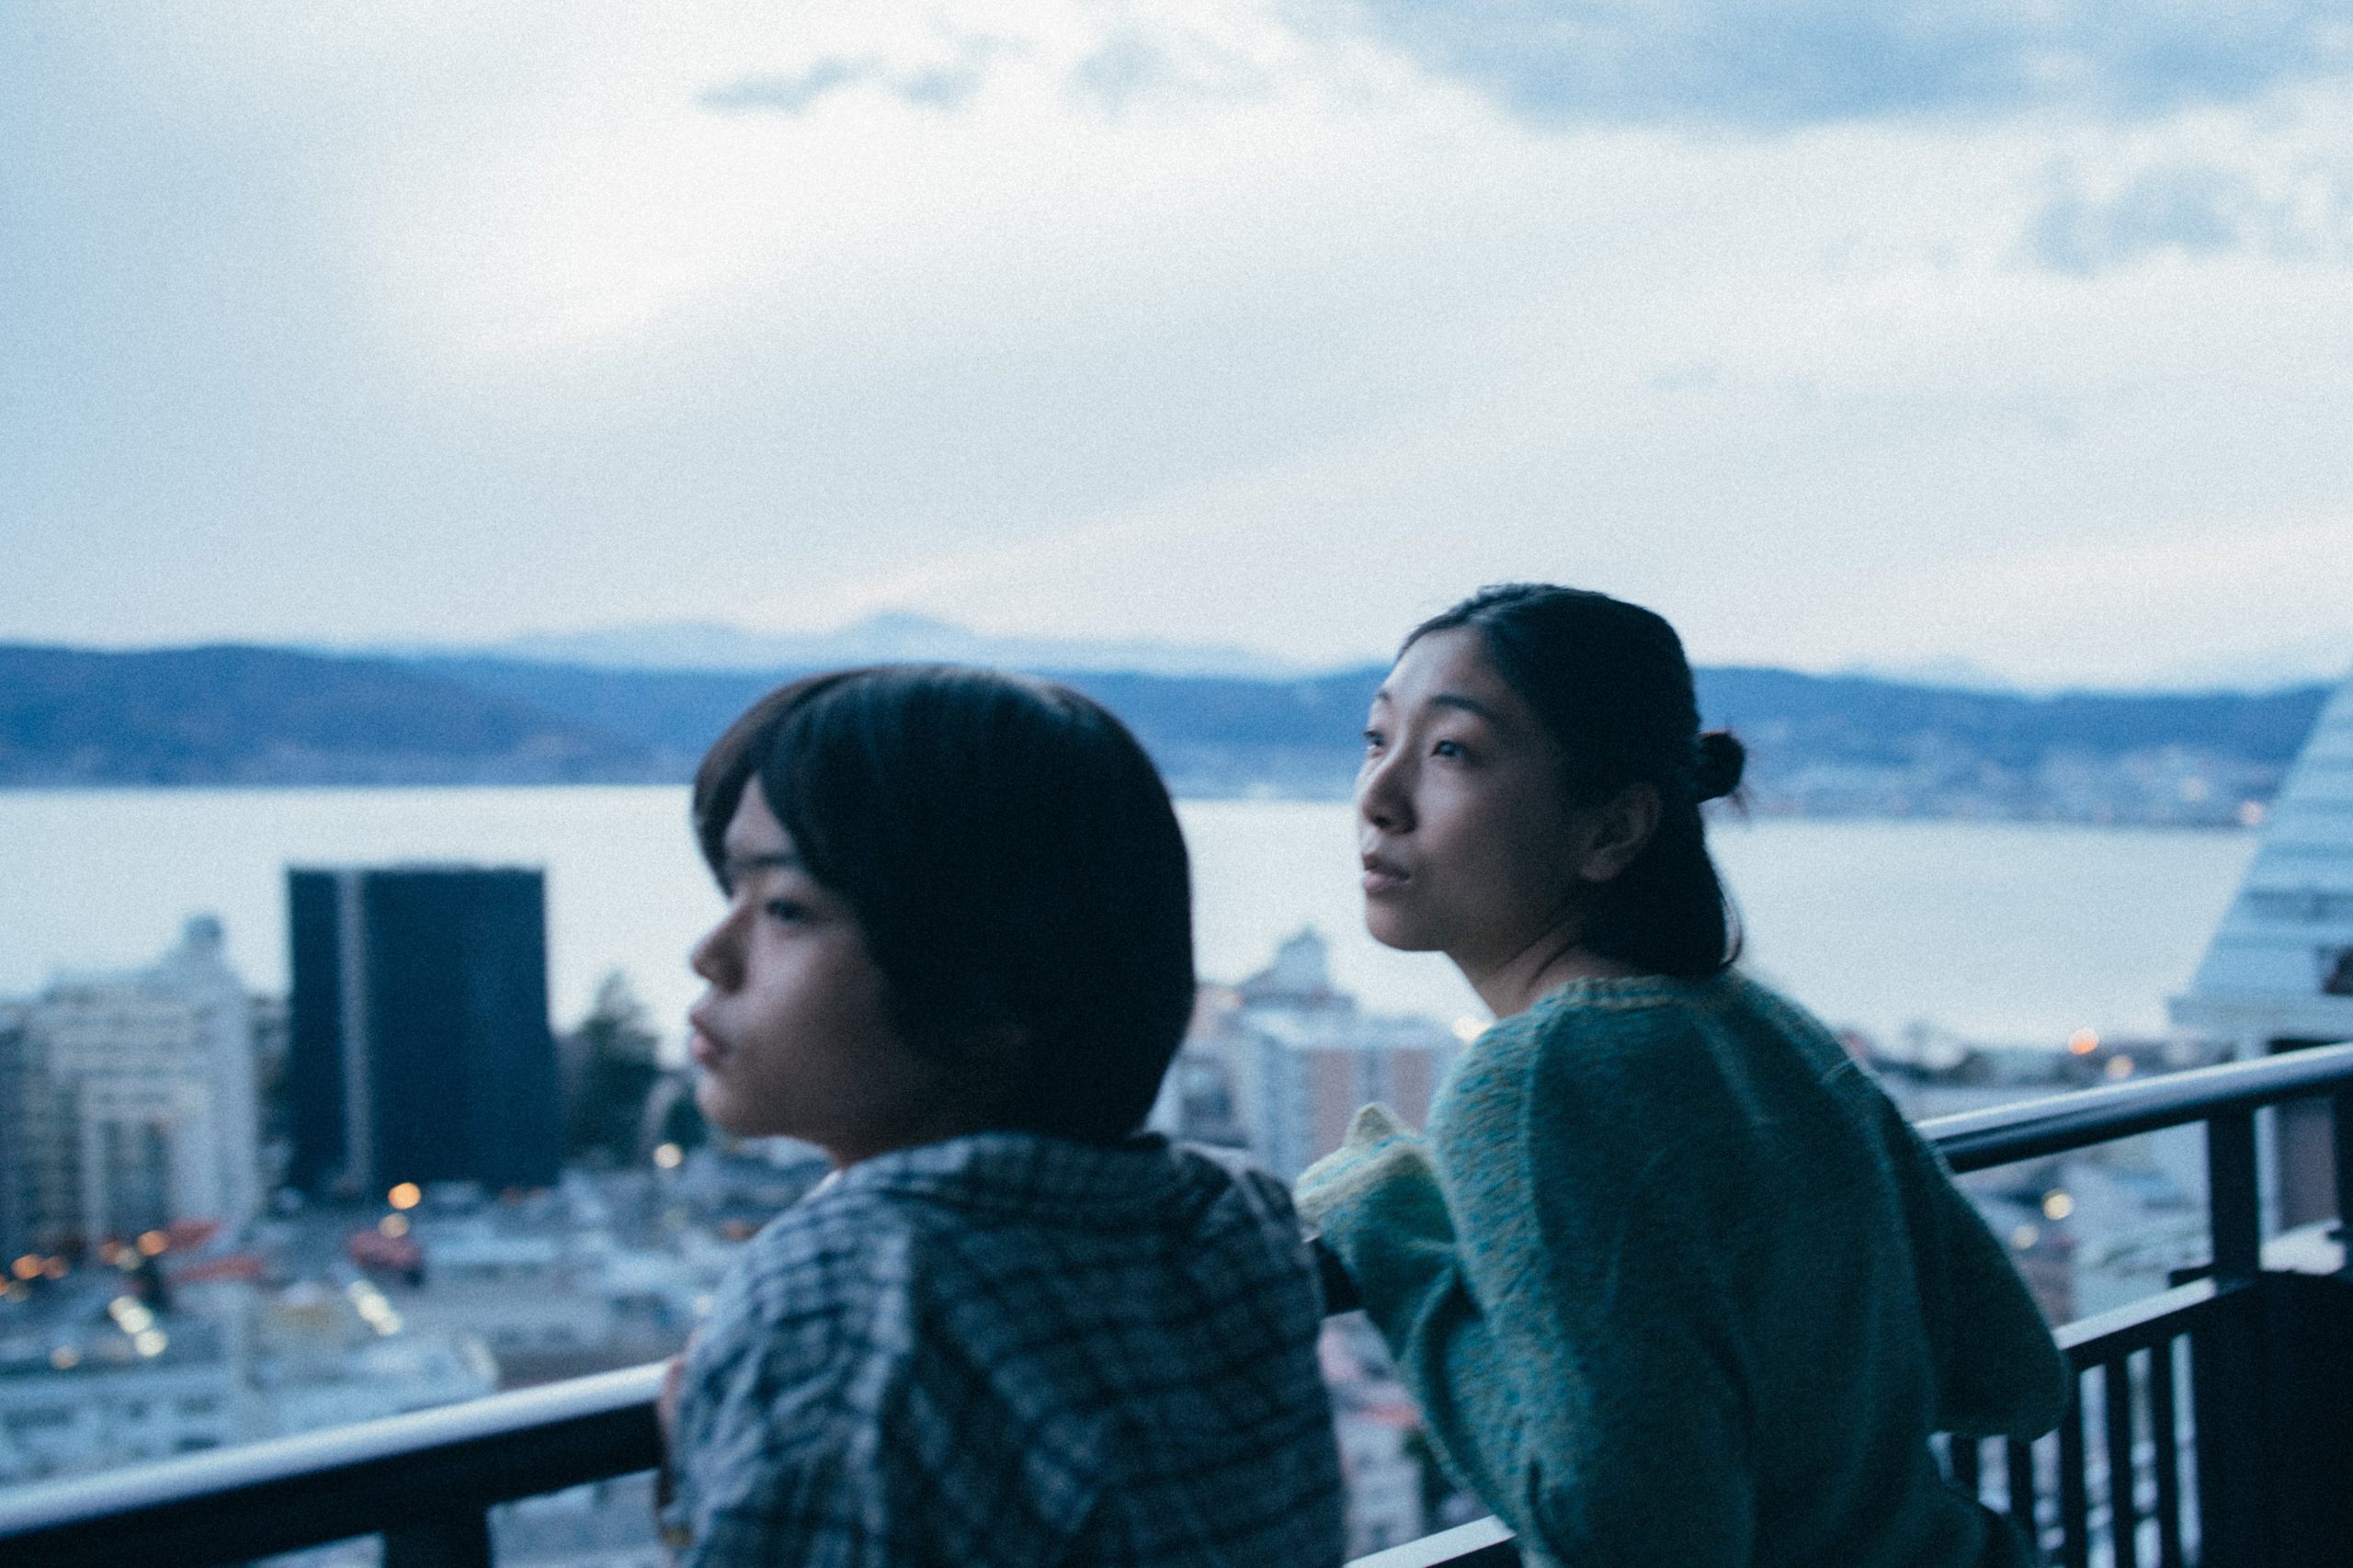 A Japanese boy and his mother stand looking out from their balcony with forlorn expressions. In the distance we can see the city, a body of water, and the mountains.